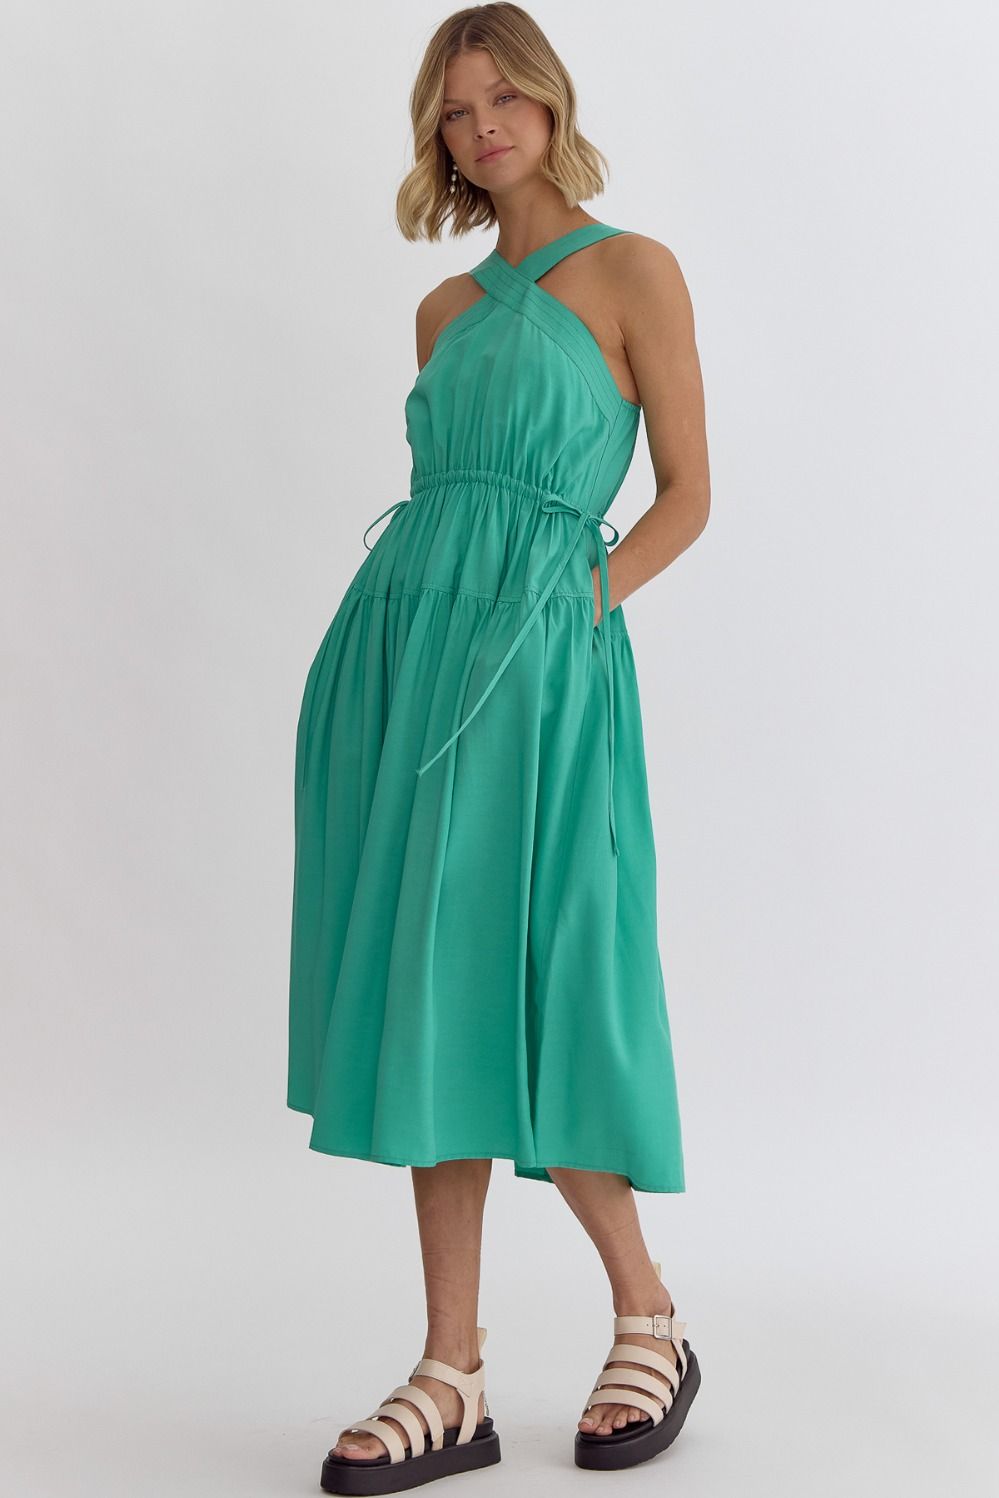 The Green Edith Side Tie Dress